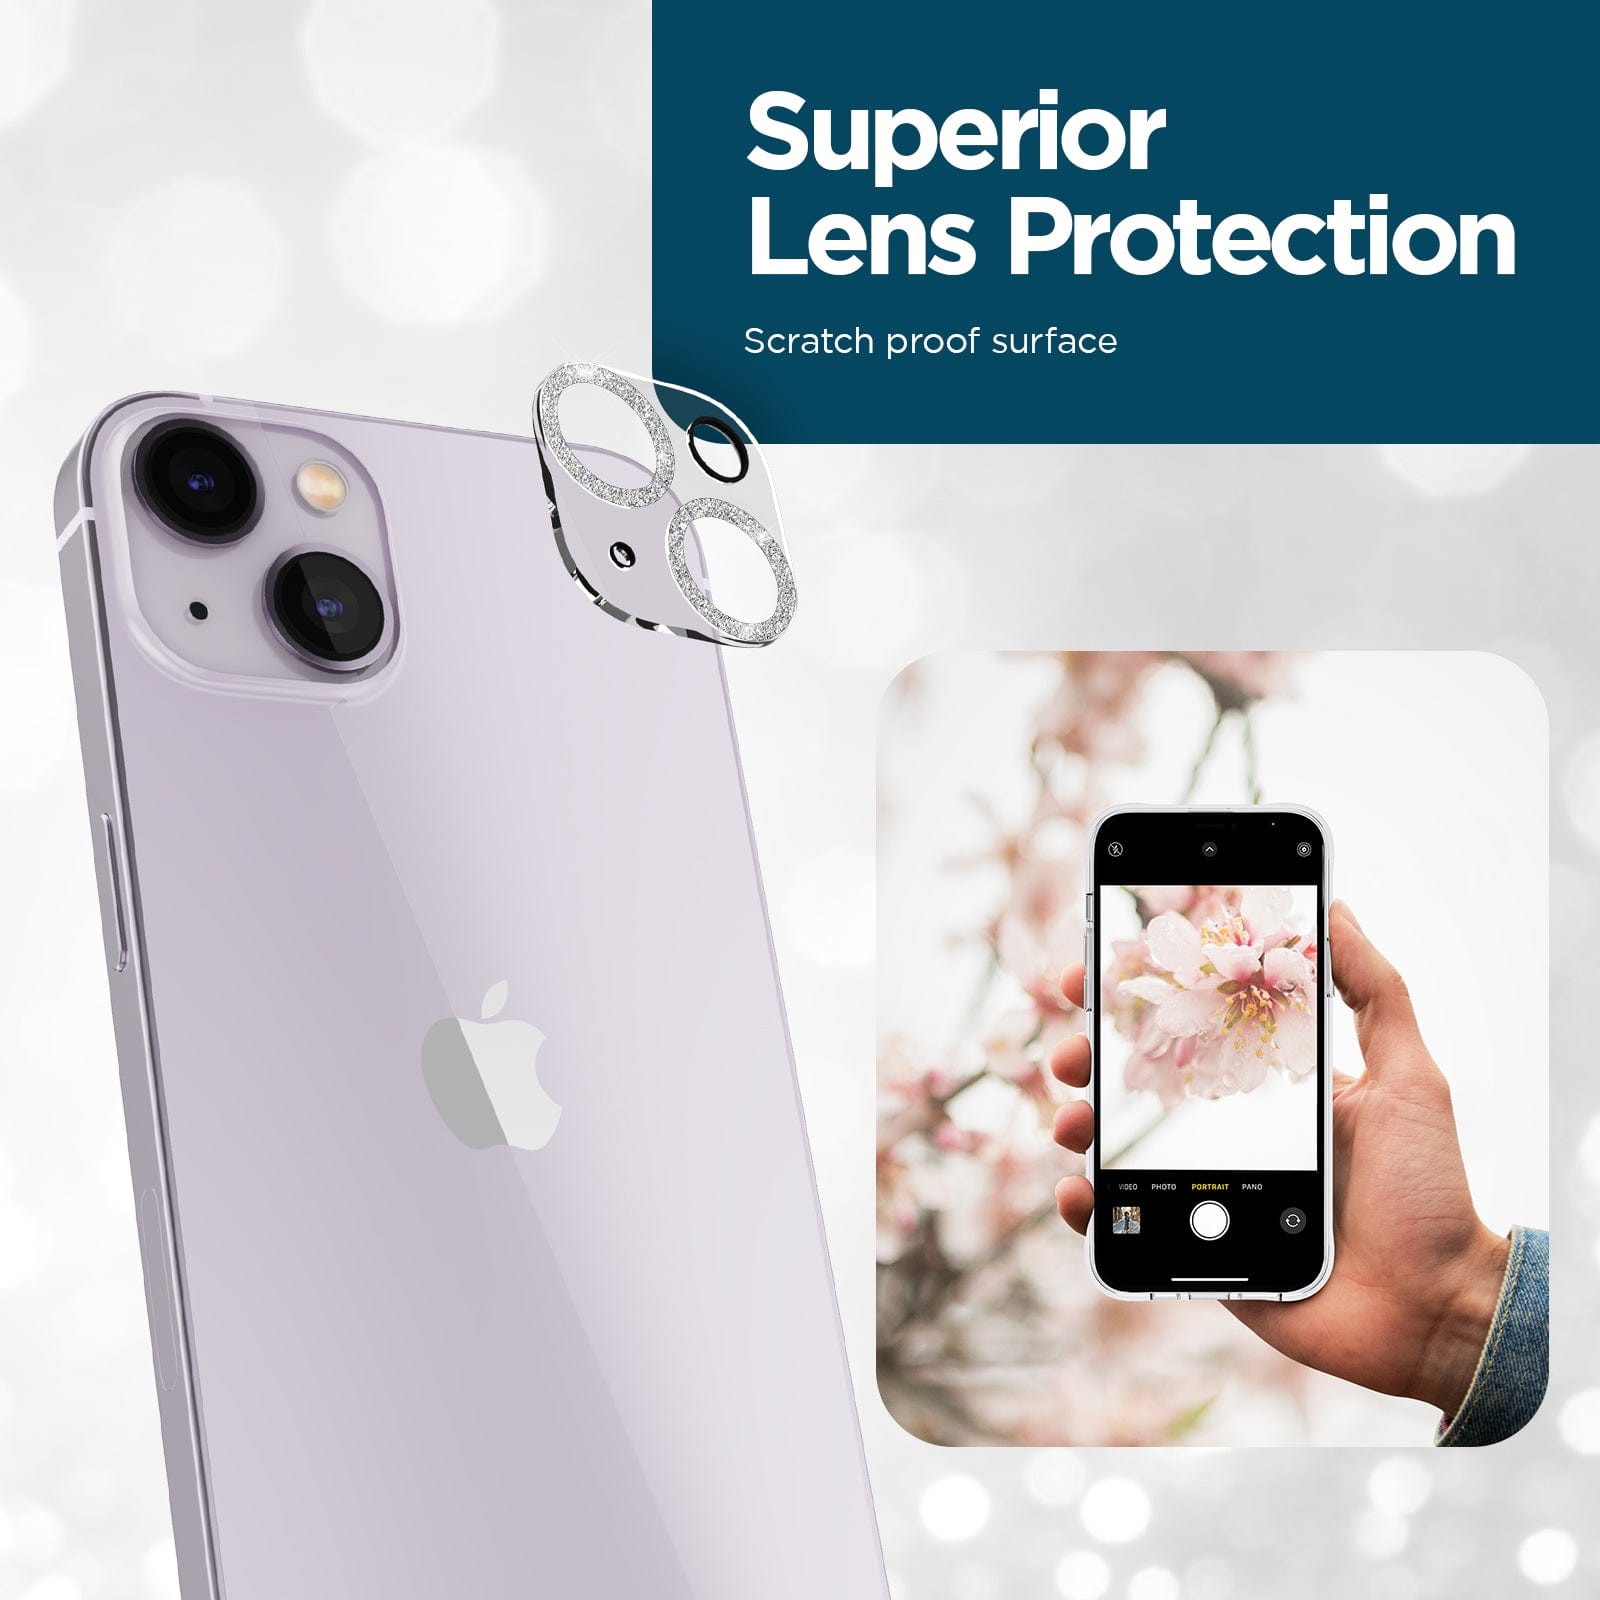 SUPERIOR LENS PROTECTION FOR A SCRATCH PROOF SURFACE